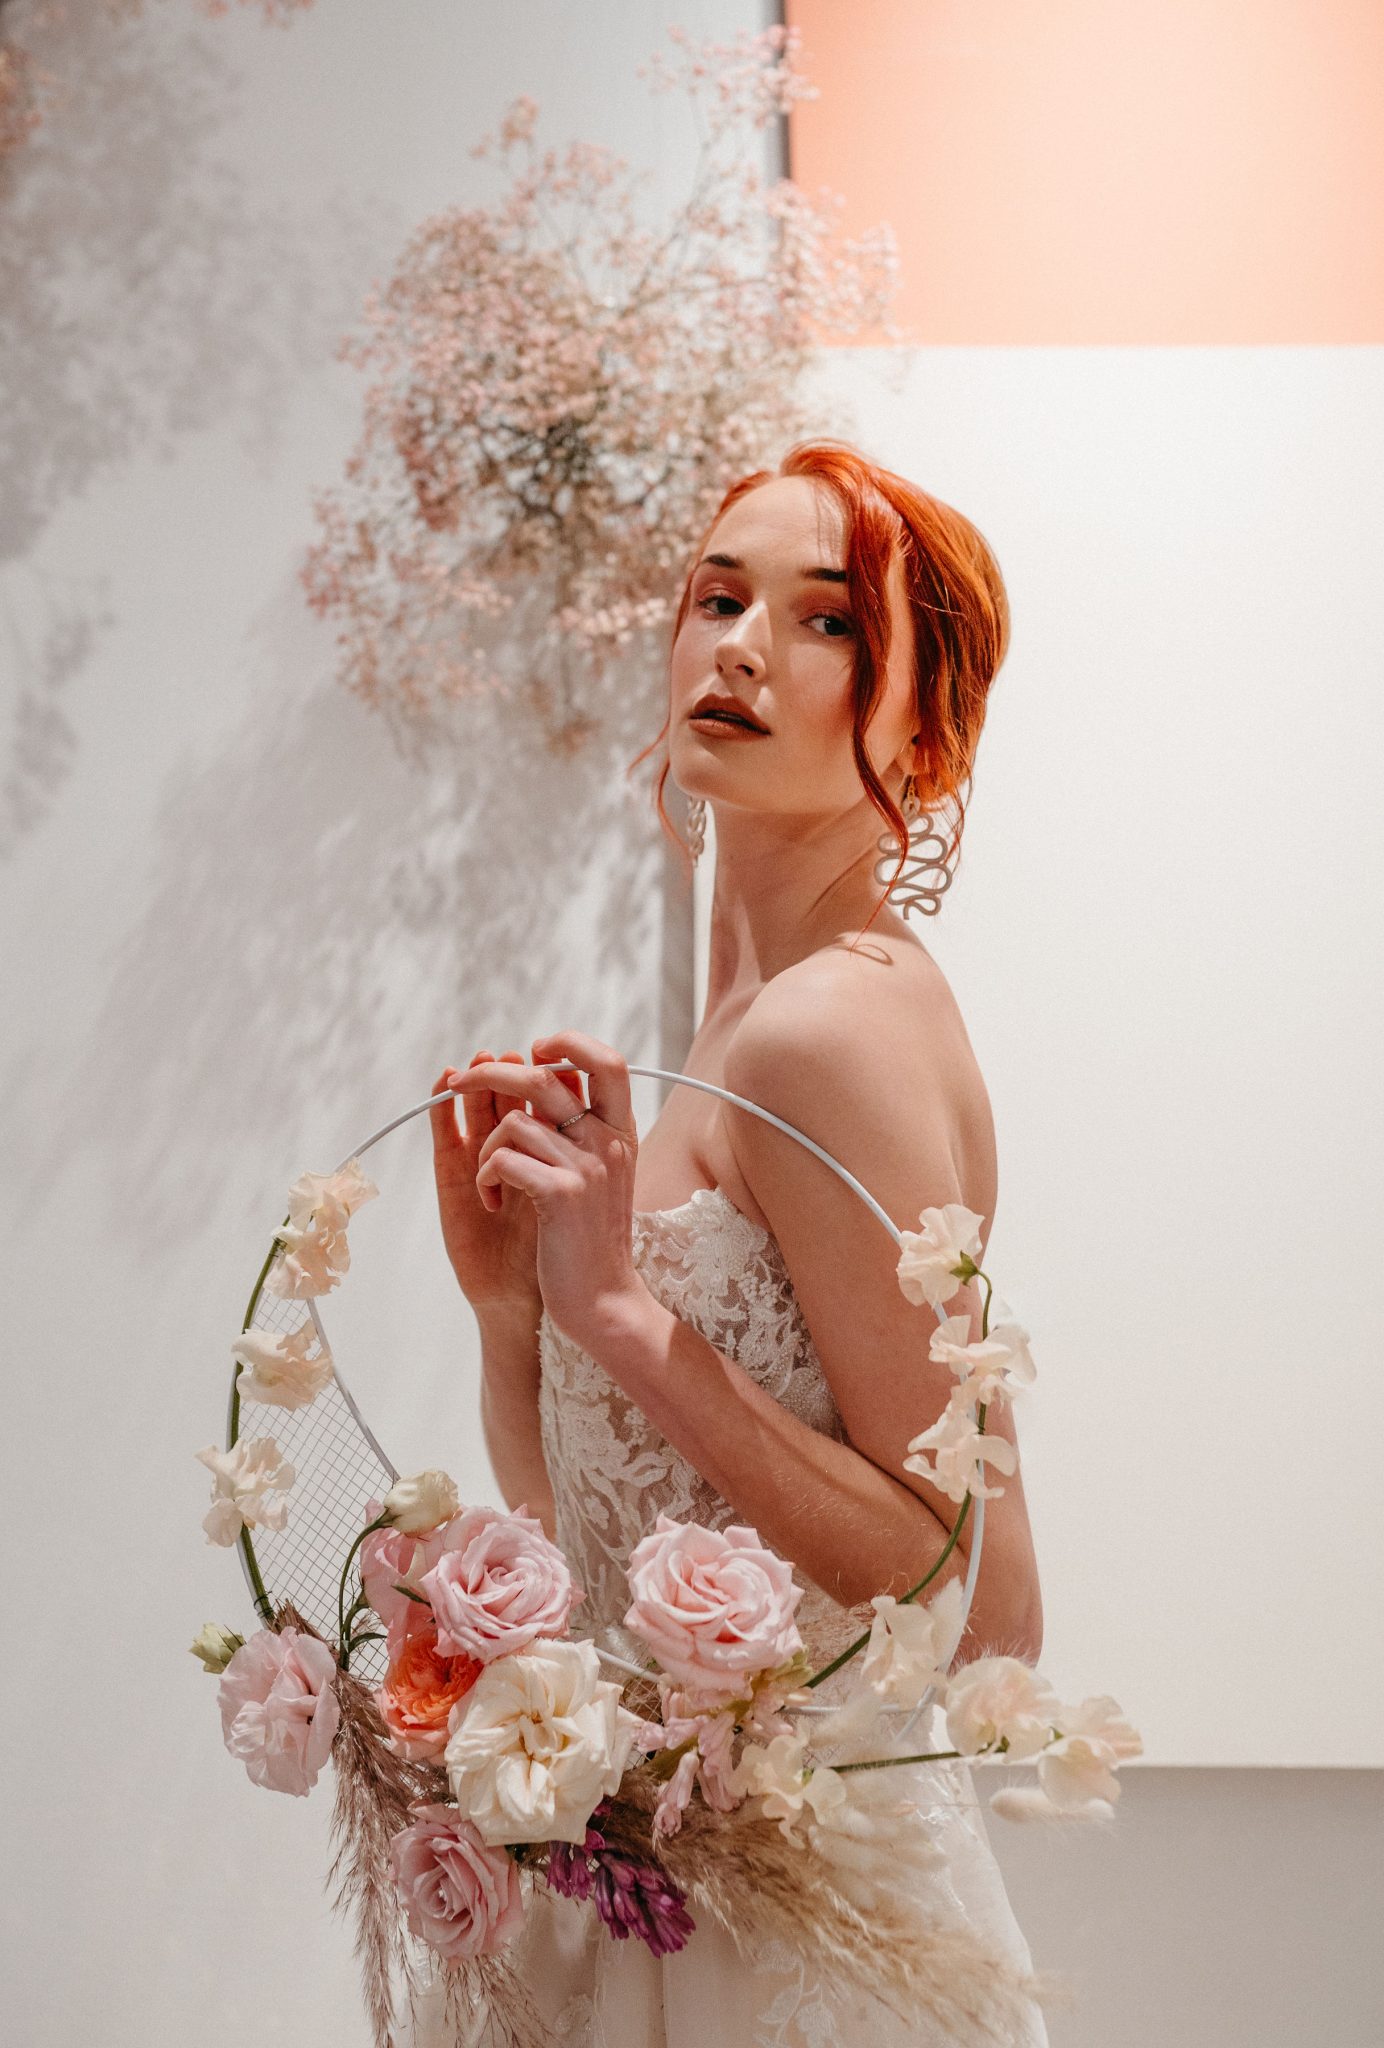 Red head bride poses in front of red, pink and white wedding decor and holds a floral bridal hoop